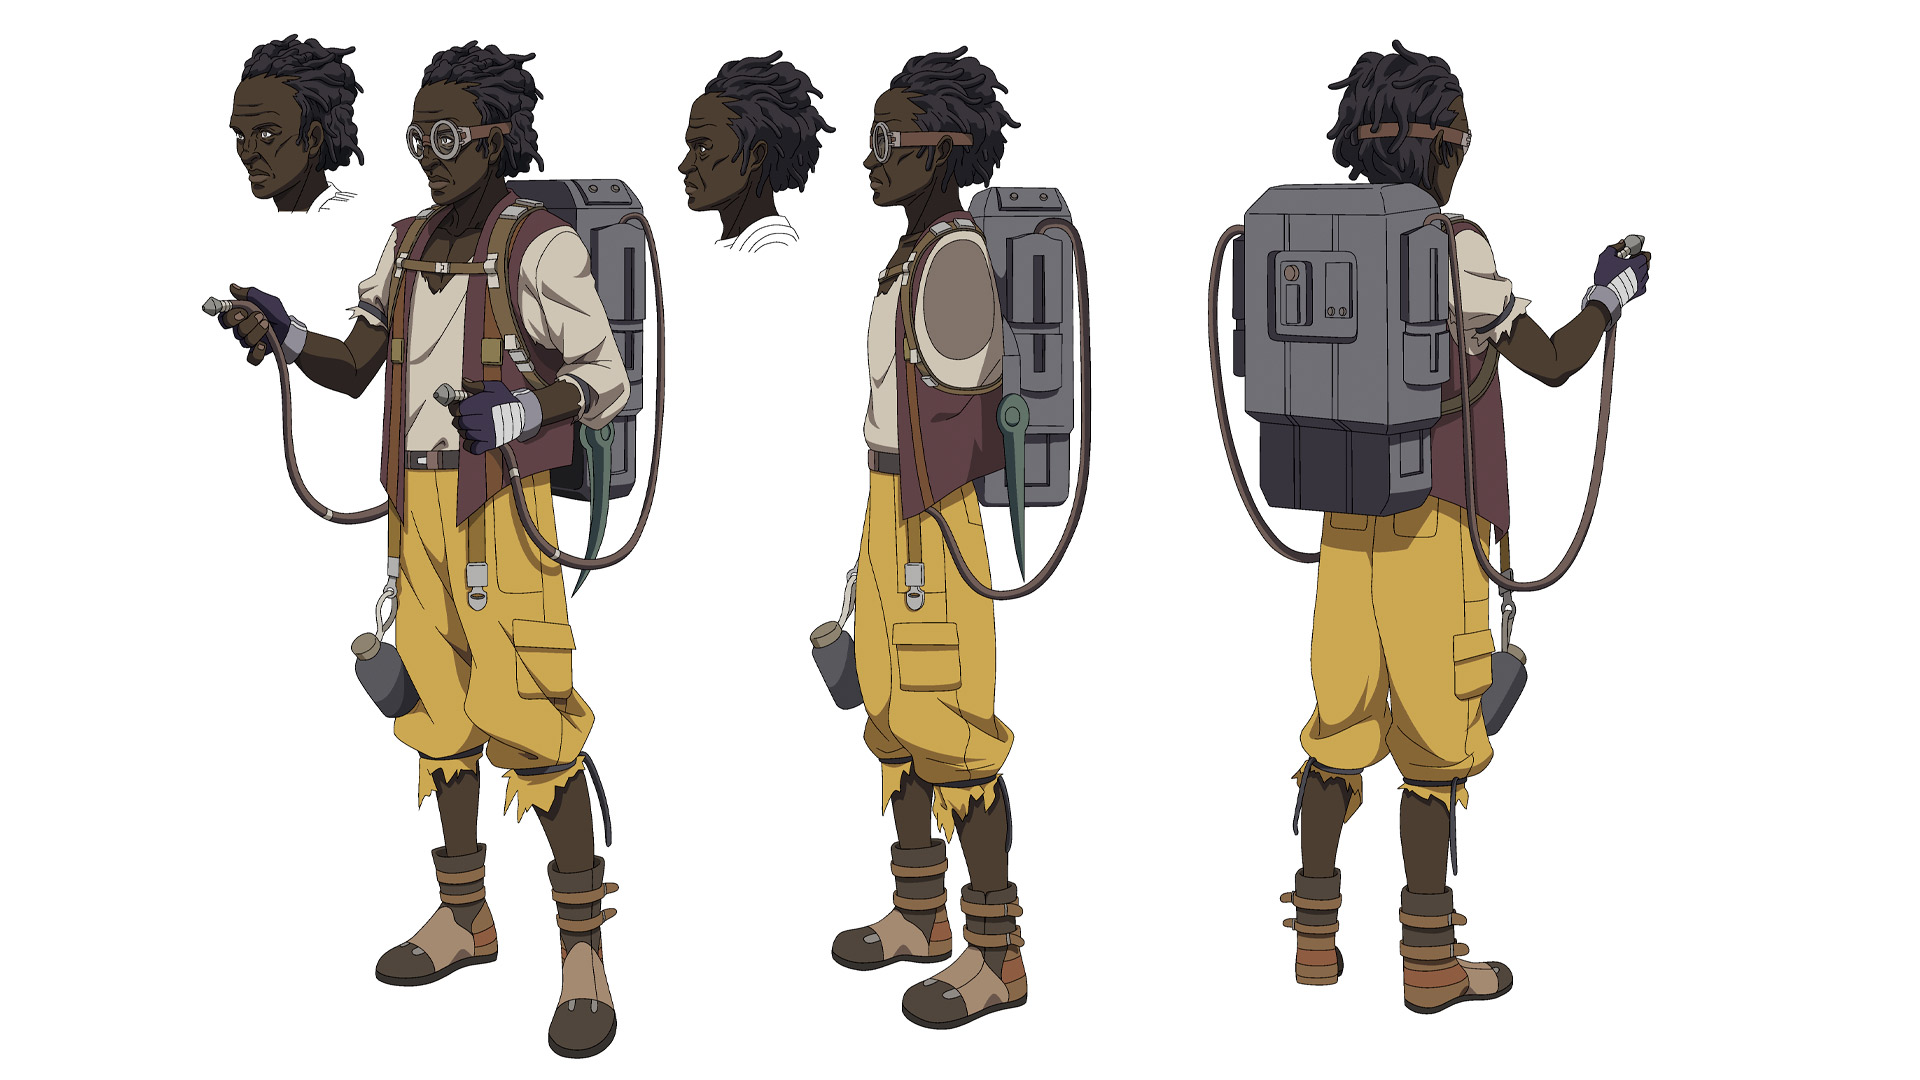 Concept art of the painter from 